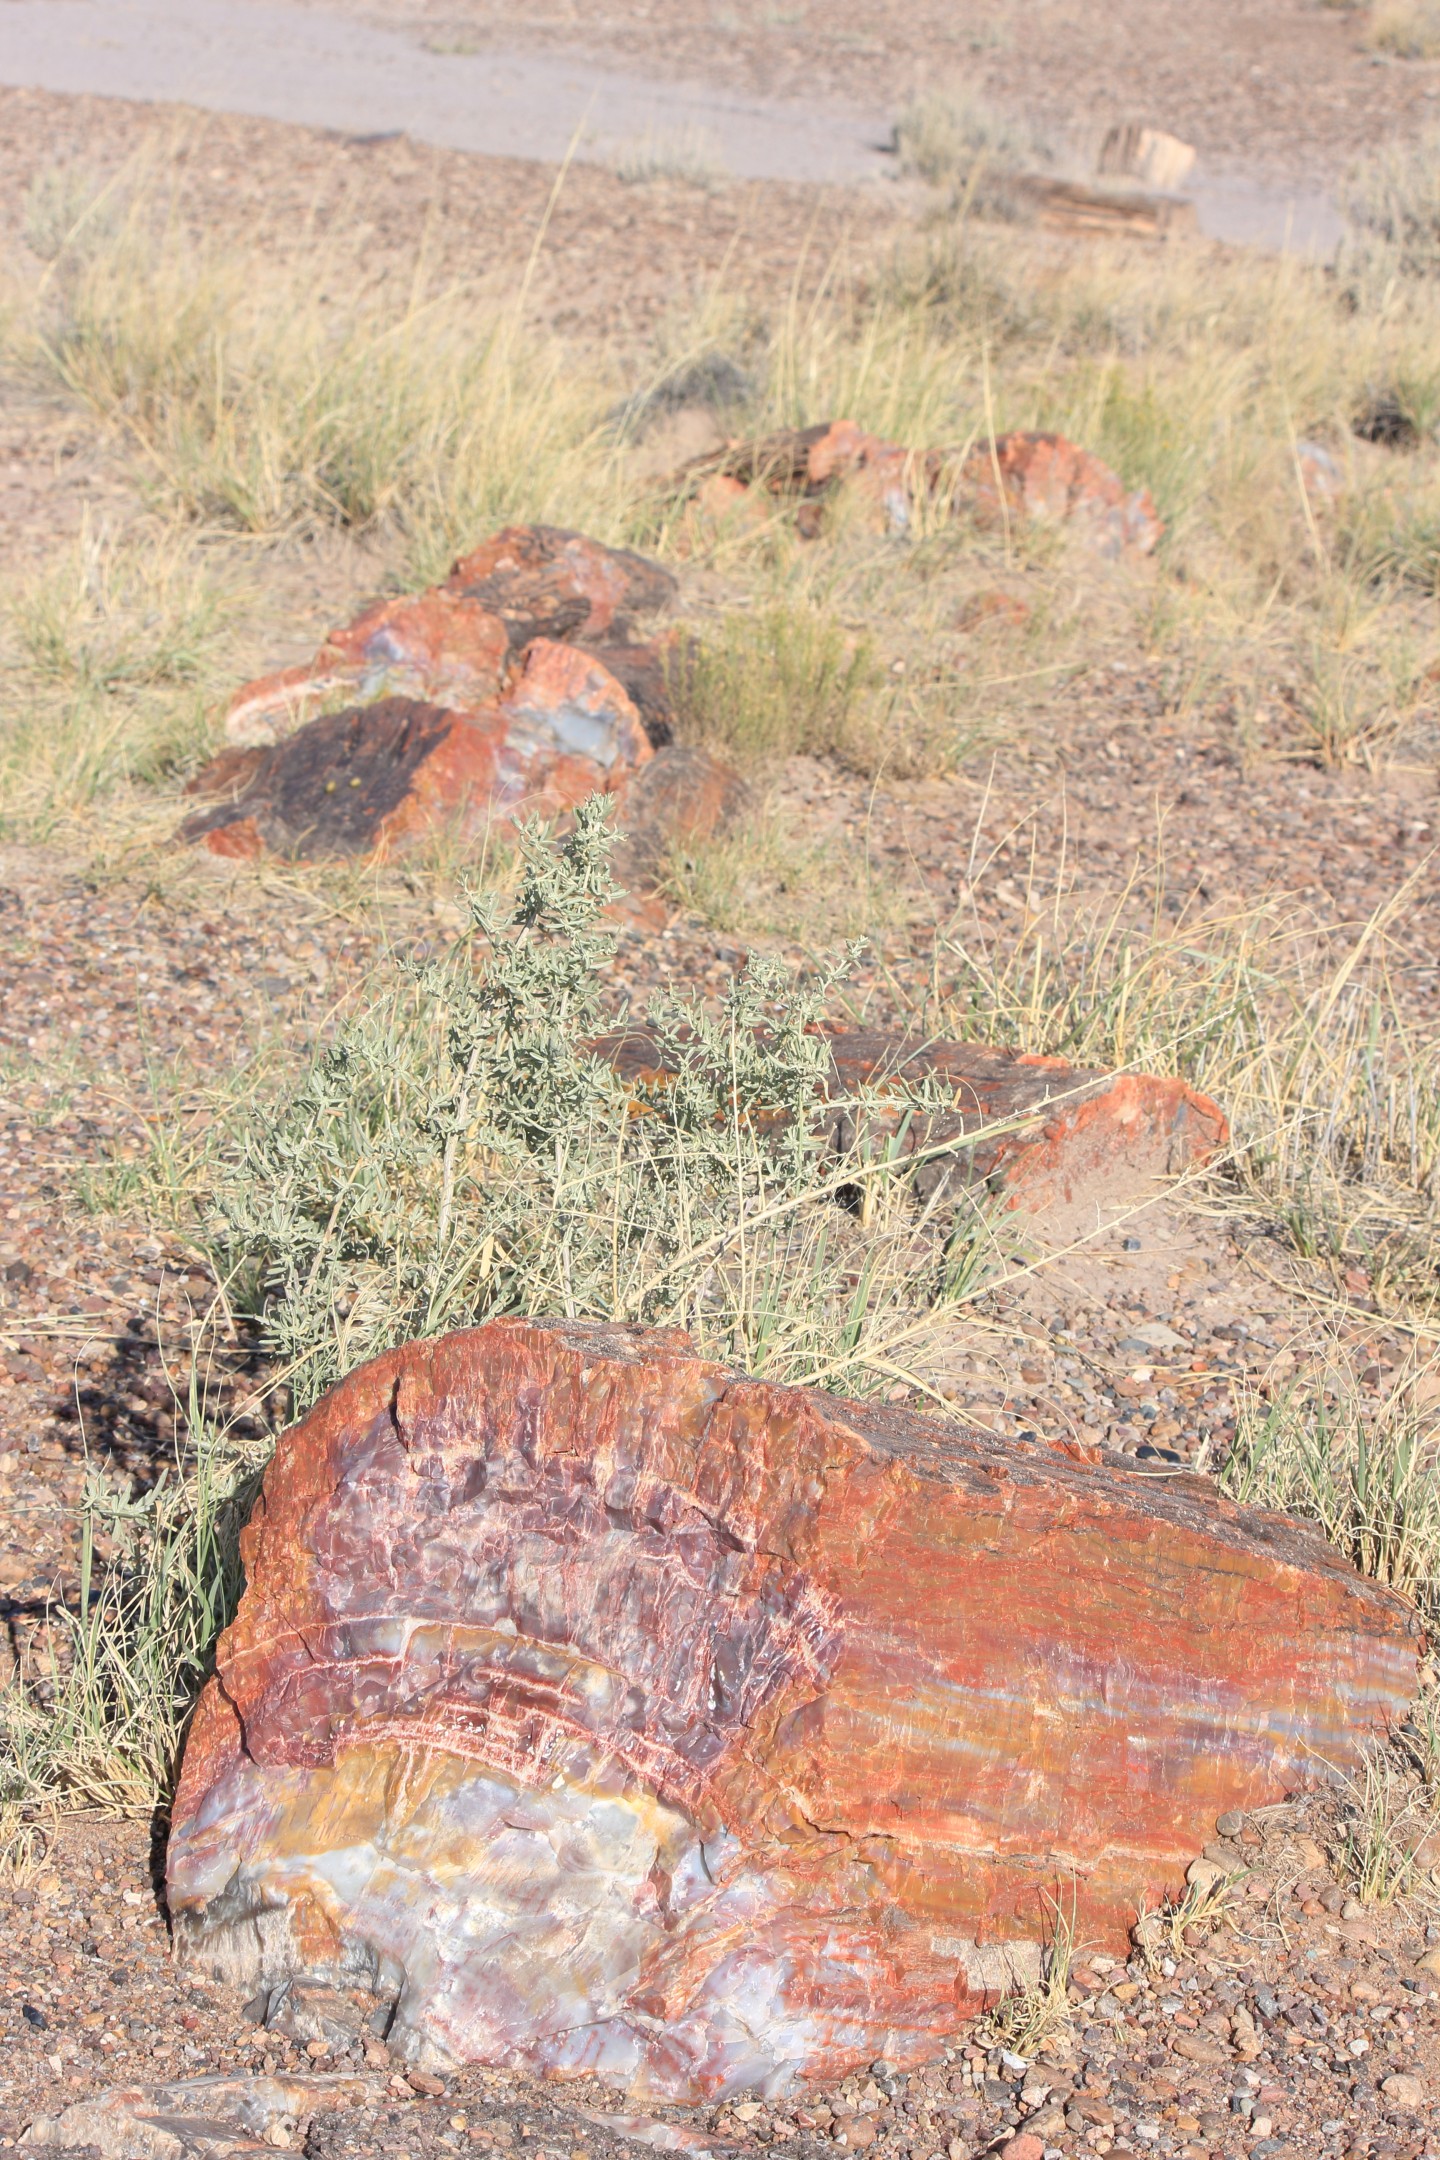 A Colourful Grouping. Several particularly colourful (iron/rust/quartz) petrified logs strewn into the distance.